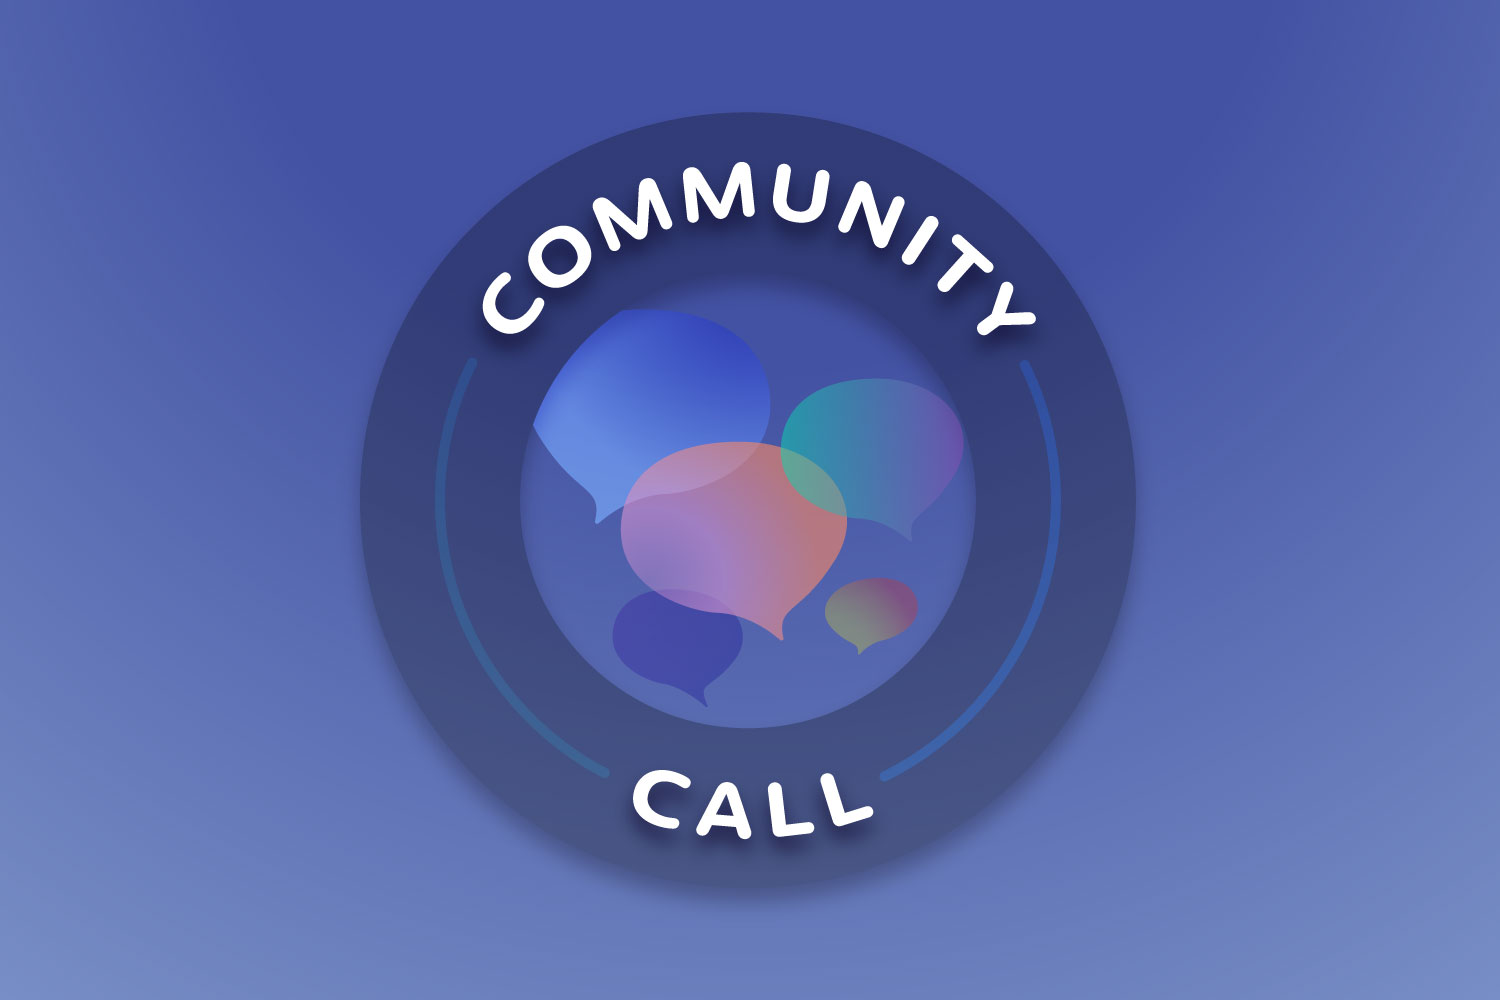 Featured image for “Community Call”